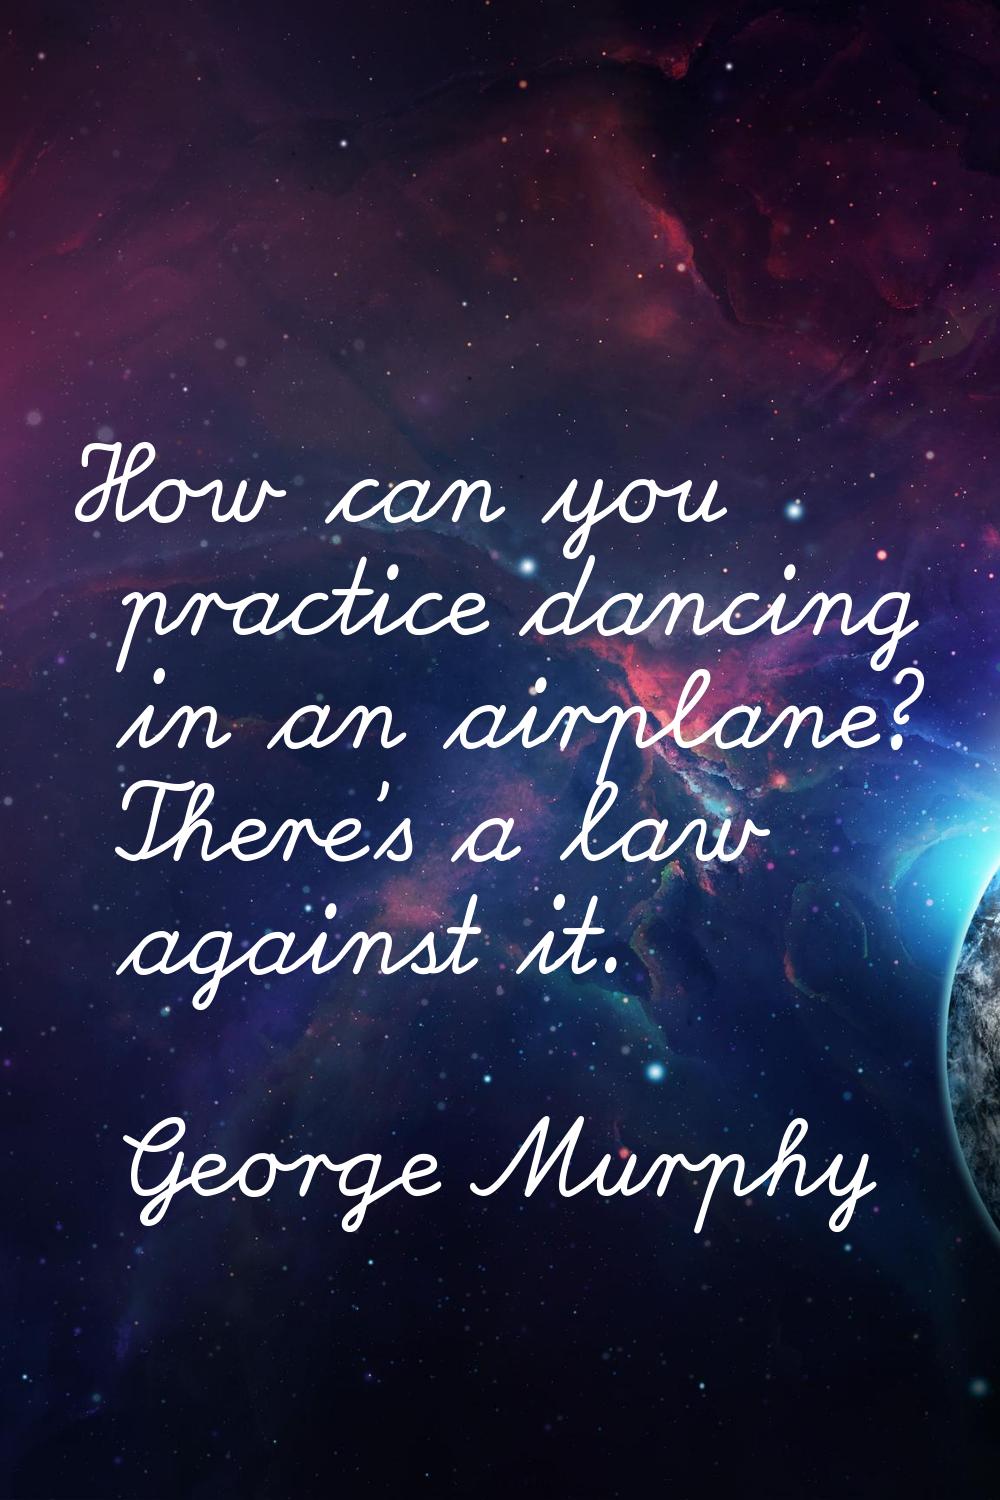 How can you practice dancing in an airplane? There's a law against it.